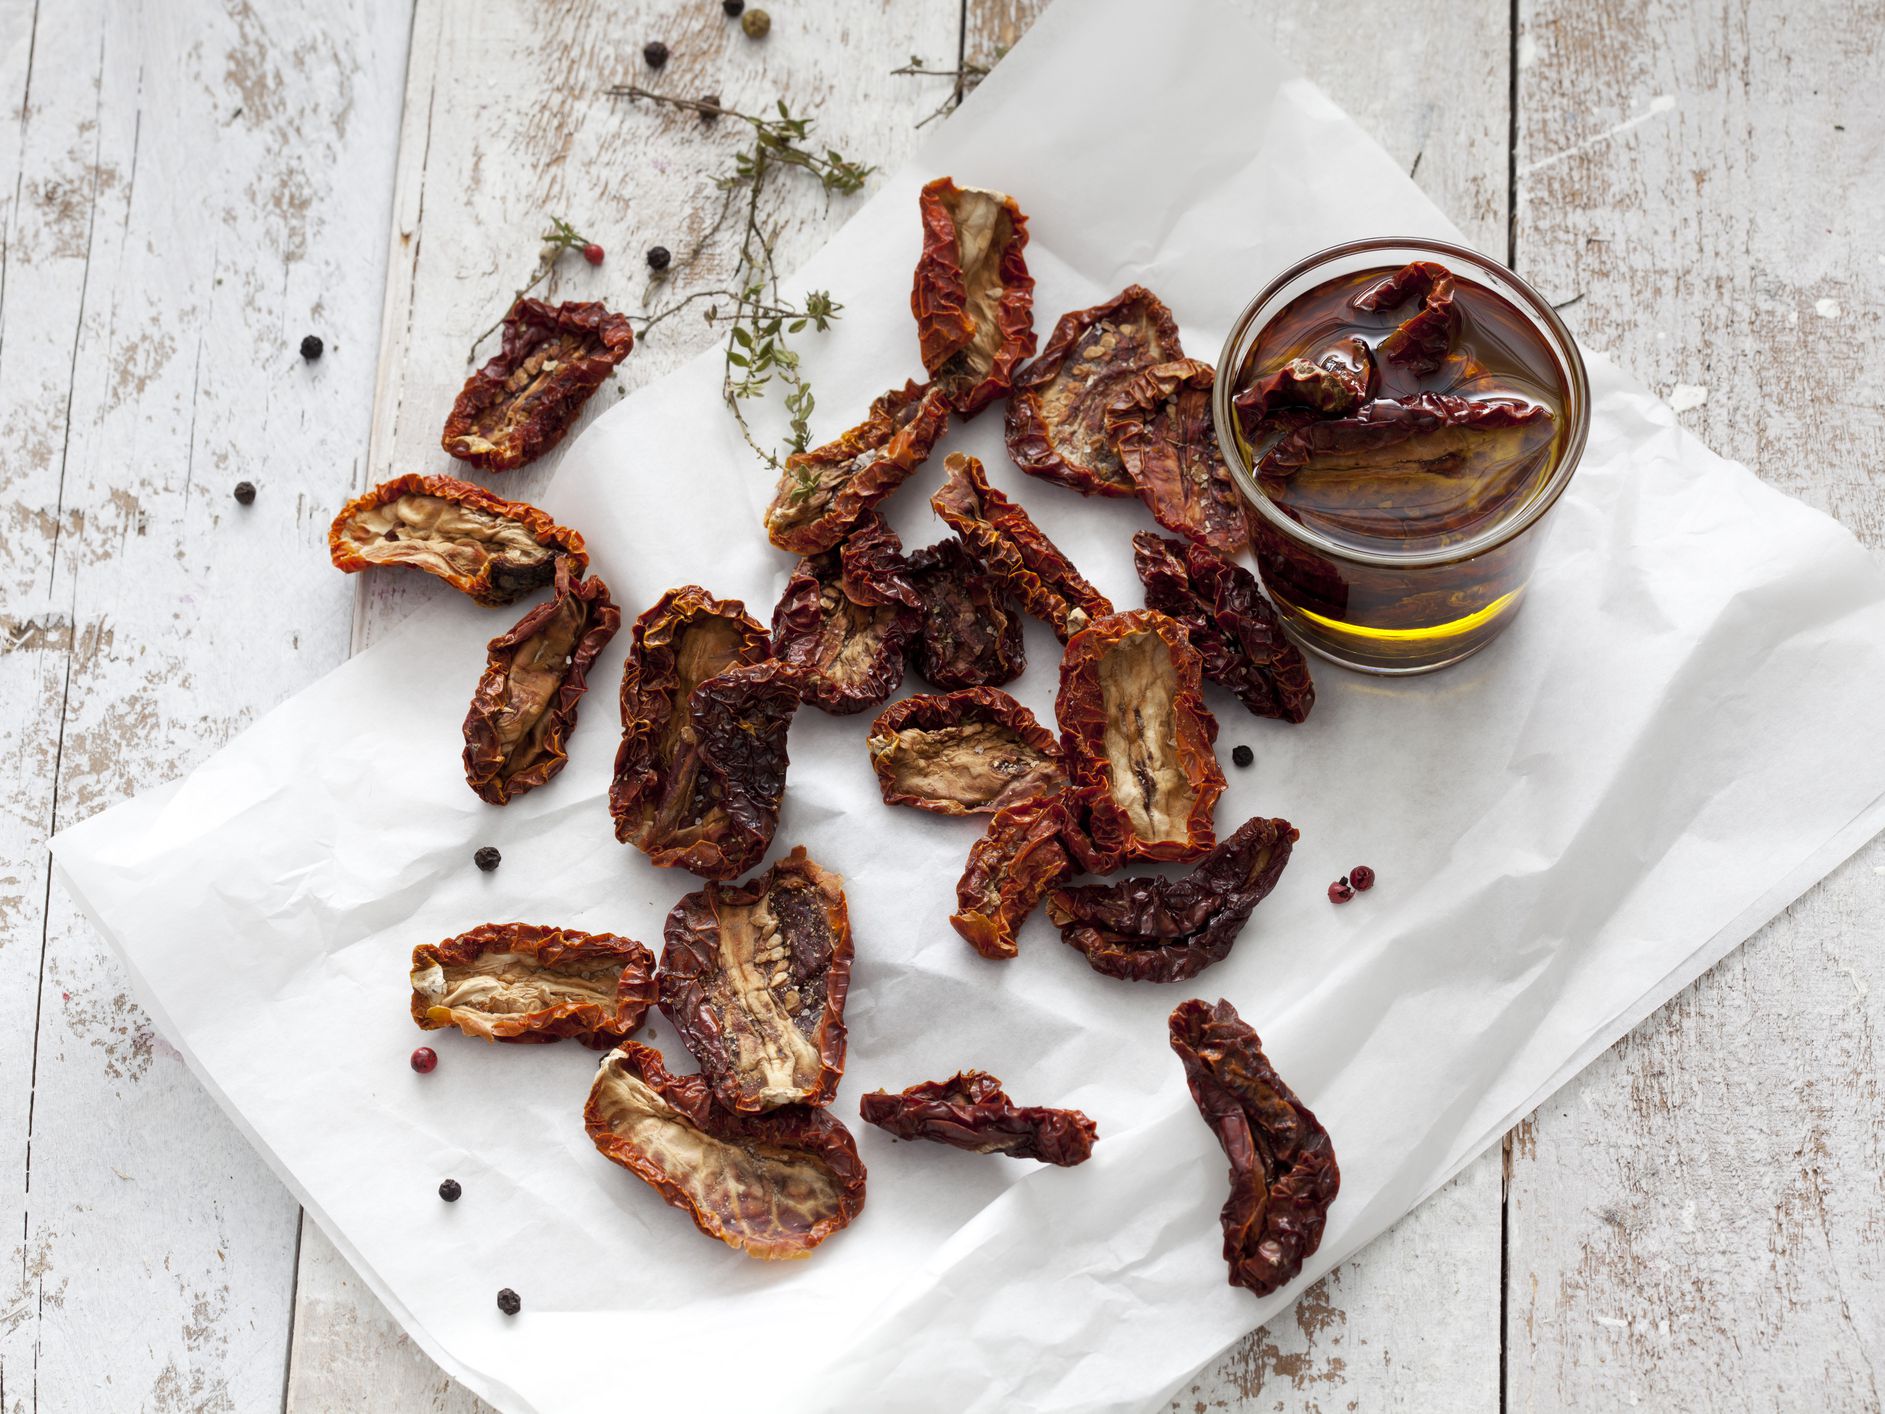 SIERRA BISTRO SUN DRIED TOMATOES IN OLIVE OIL 180G